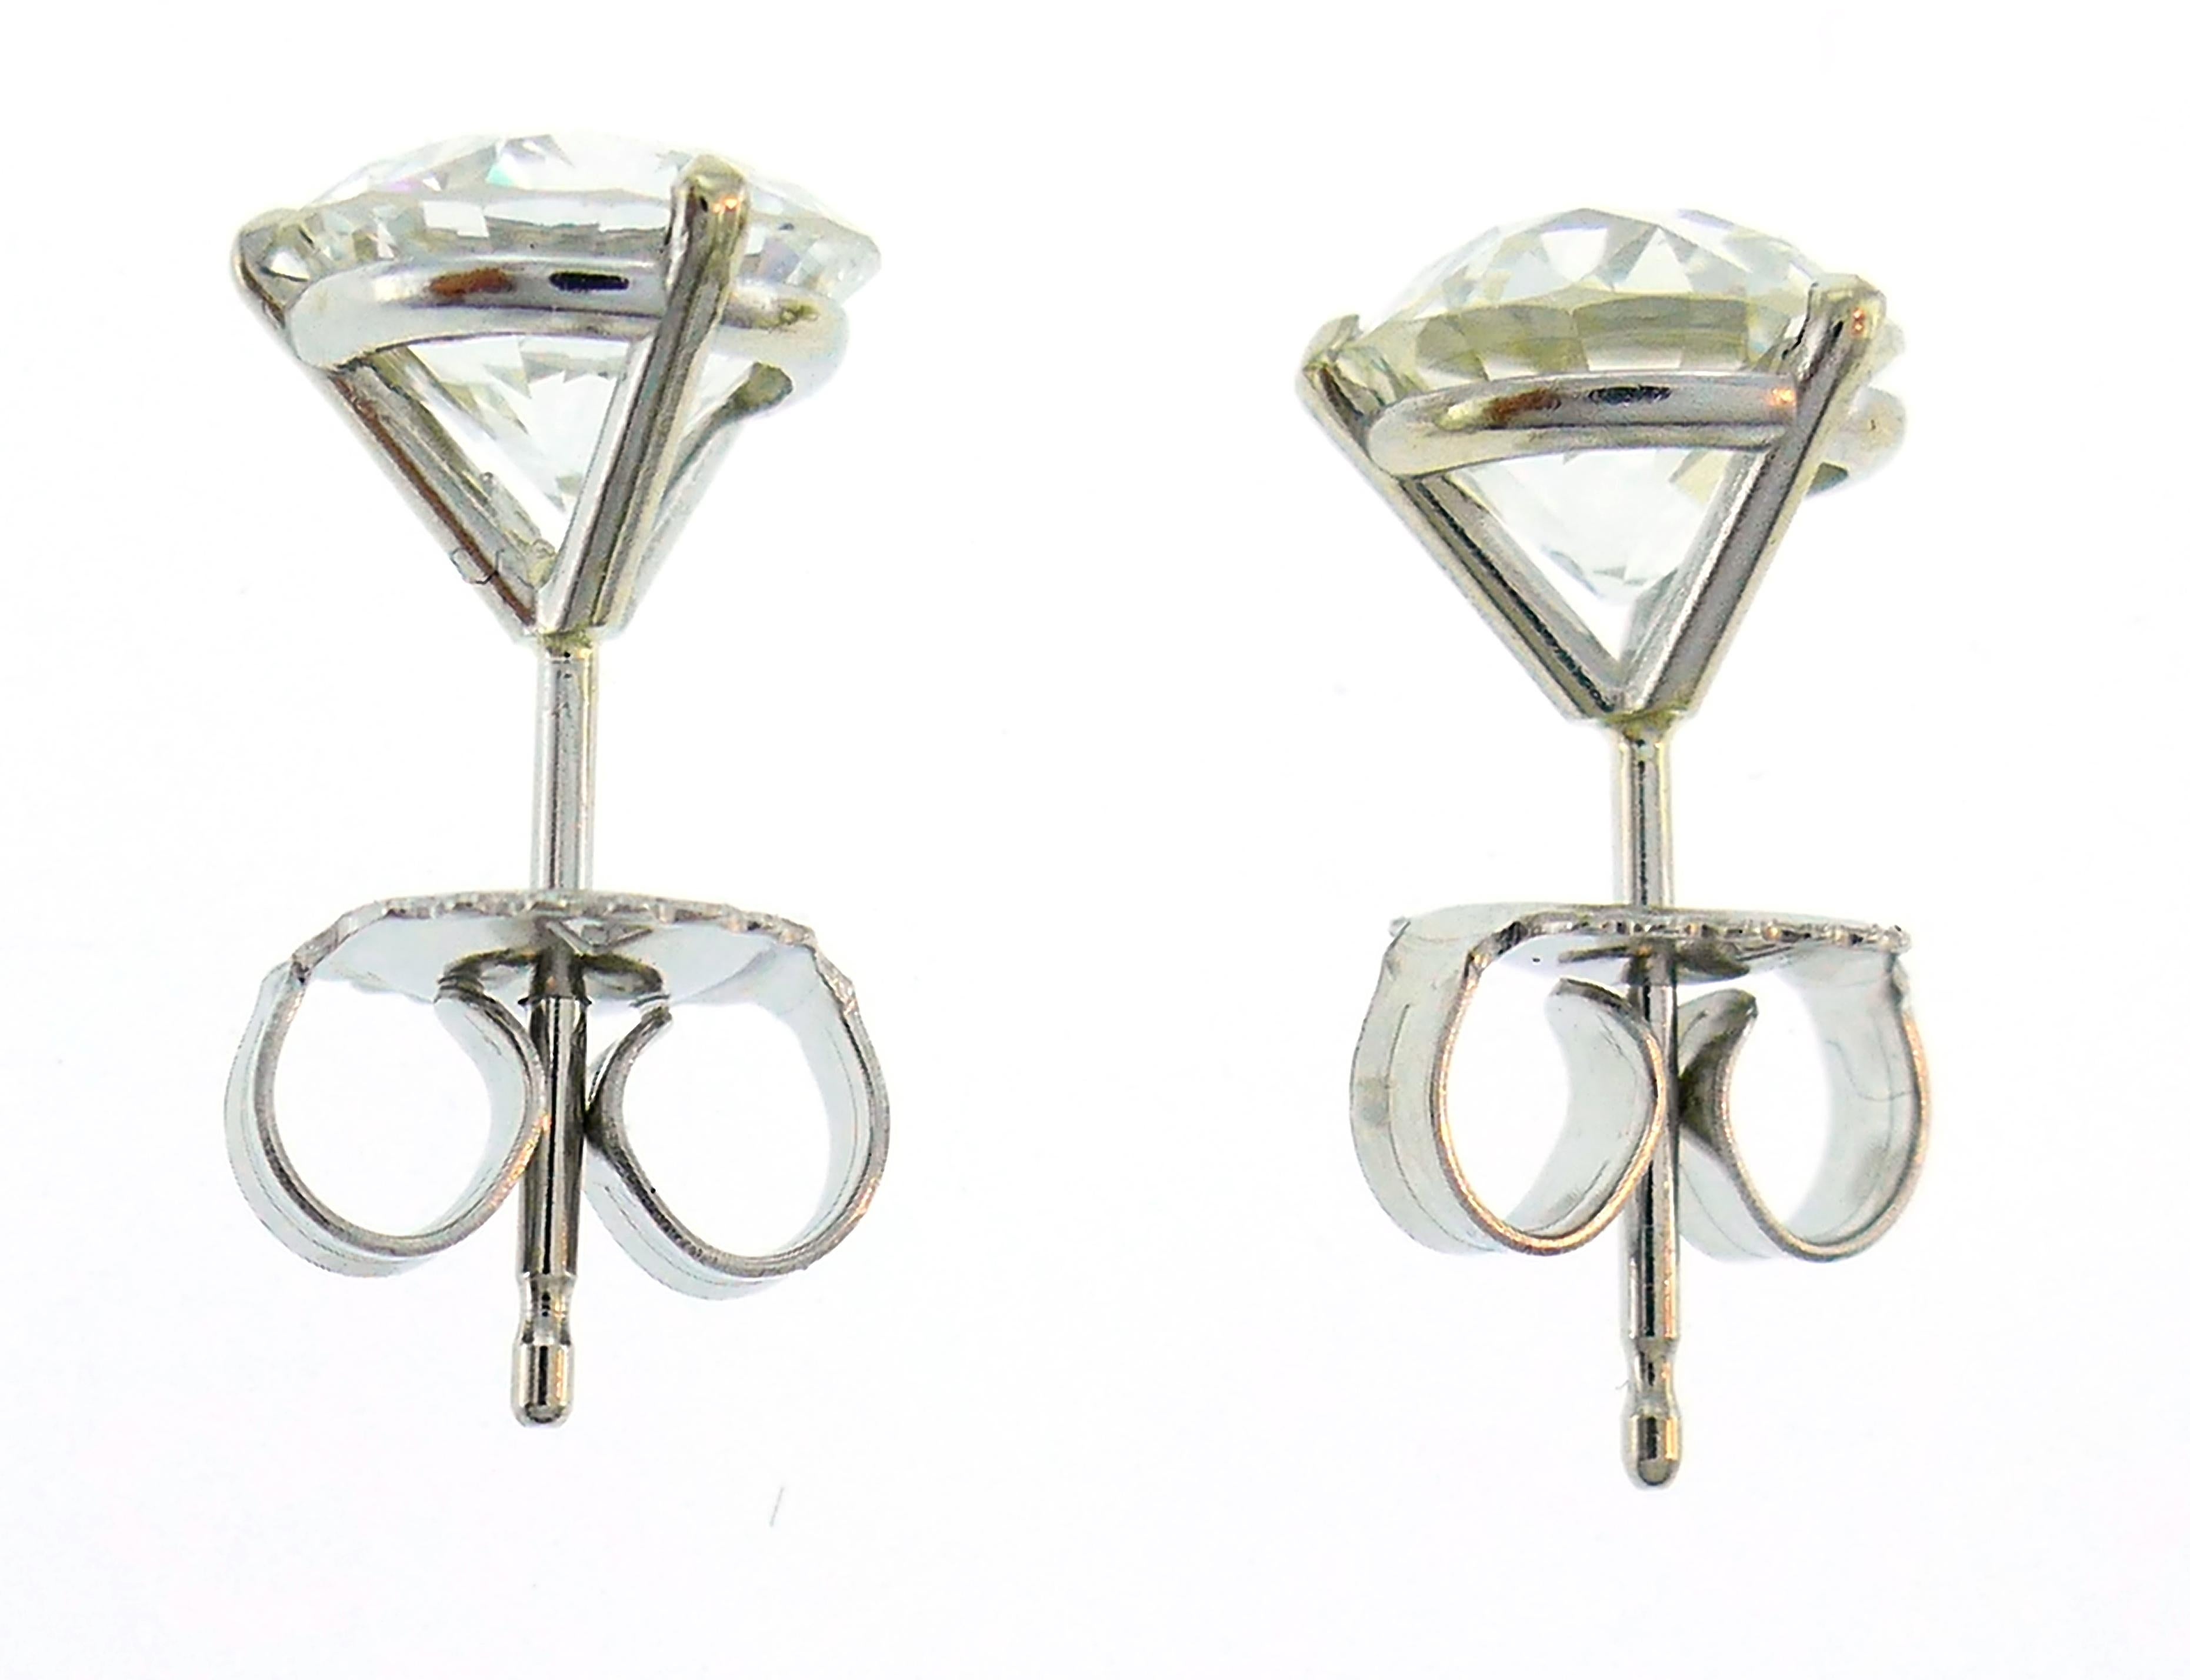 A pair of classic diamond stud earrings that features two 1.39-carat each Old European cut diamonds, H-I color and VS2 clarity. The settings are made of 14 karat white gold. 
The earrings measure 5/16 x 5/8 inch (1.5 x 0.8 cm) and weigh 1.6 grams.